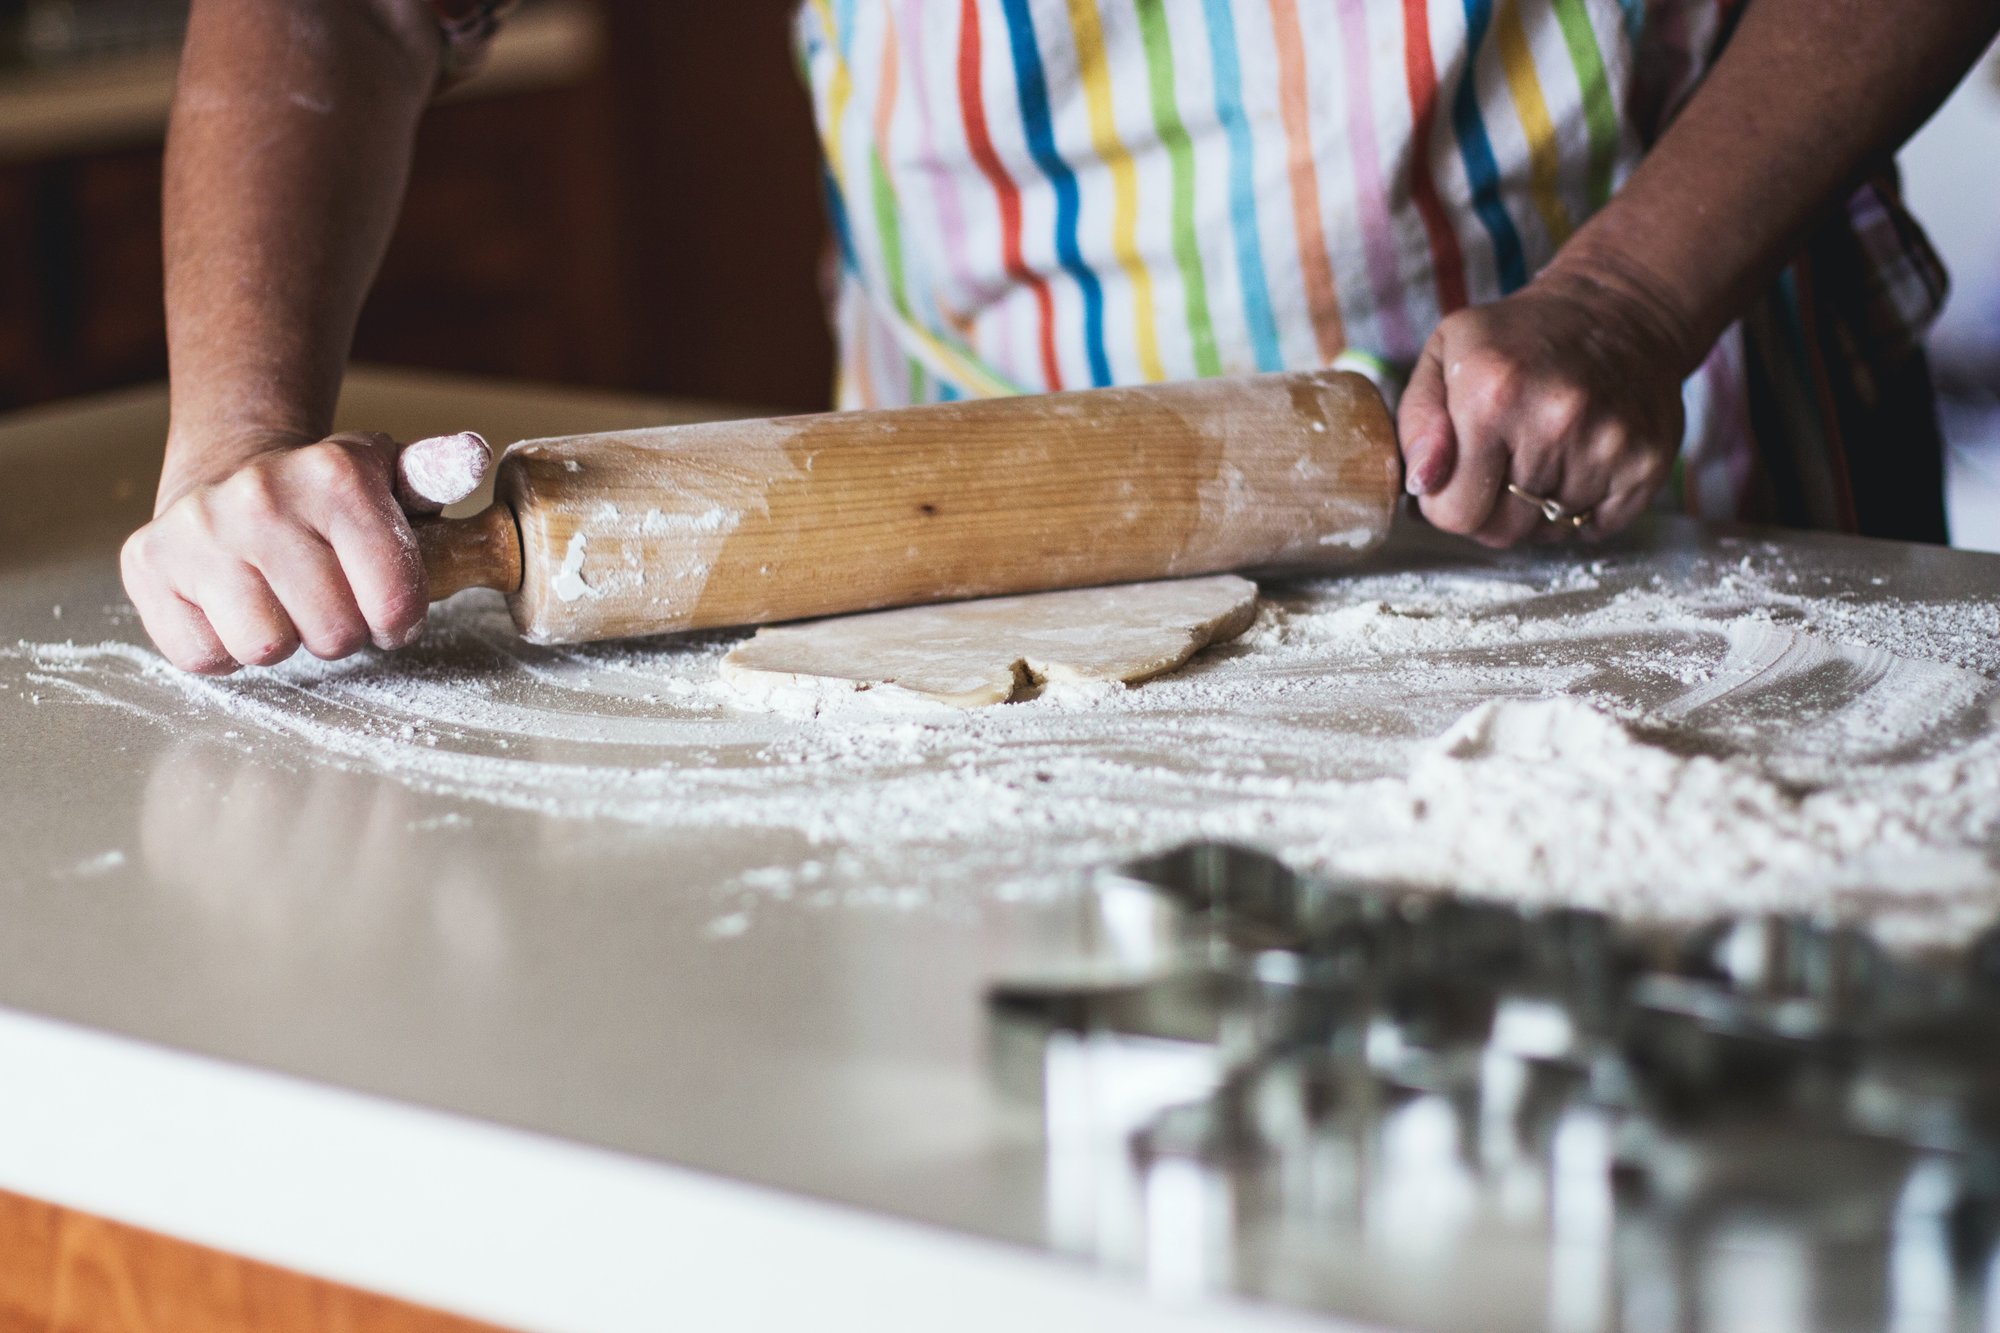 A photo showing someone rolling out dough